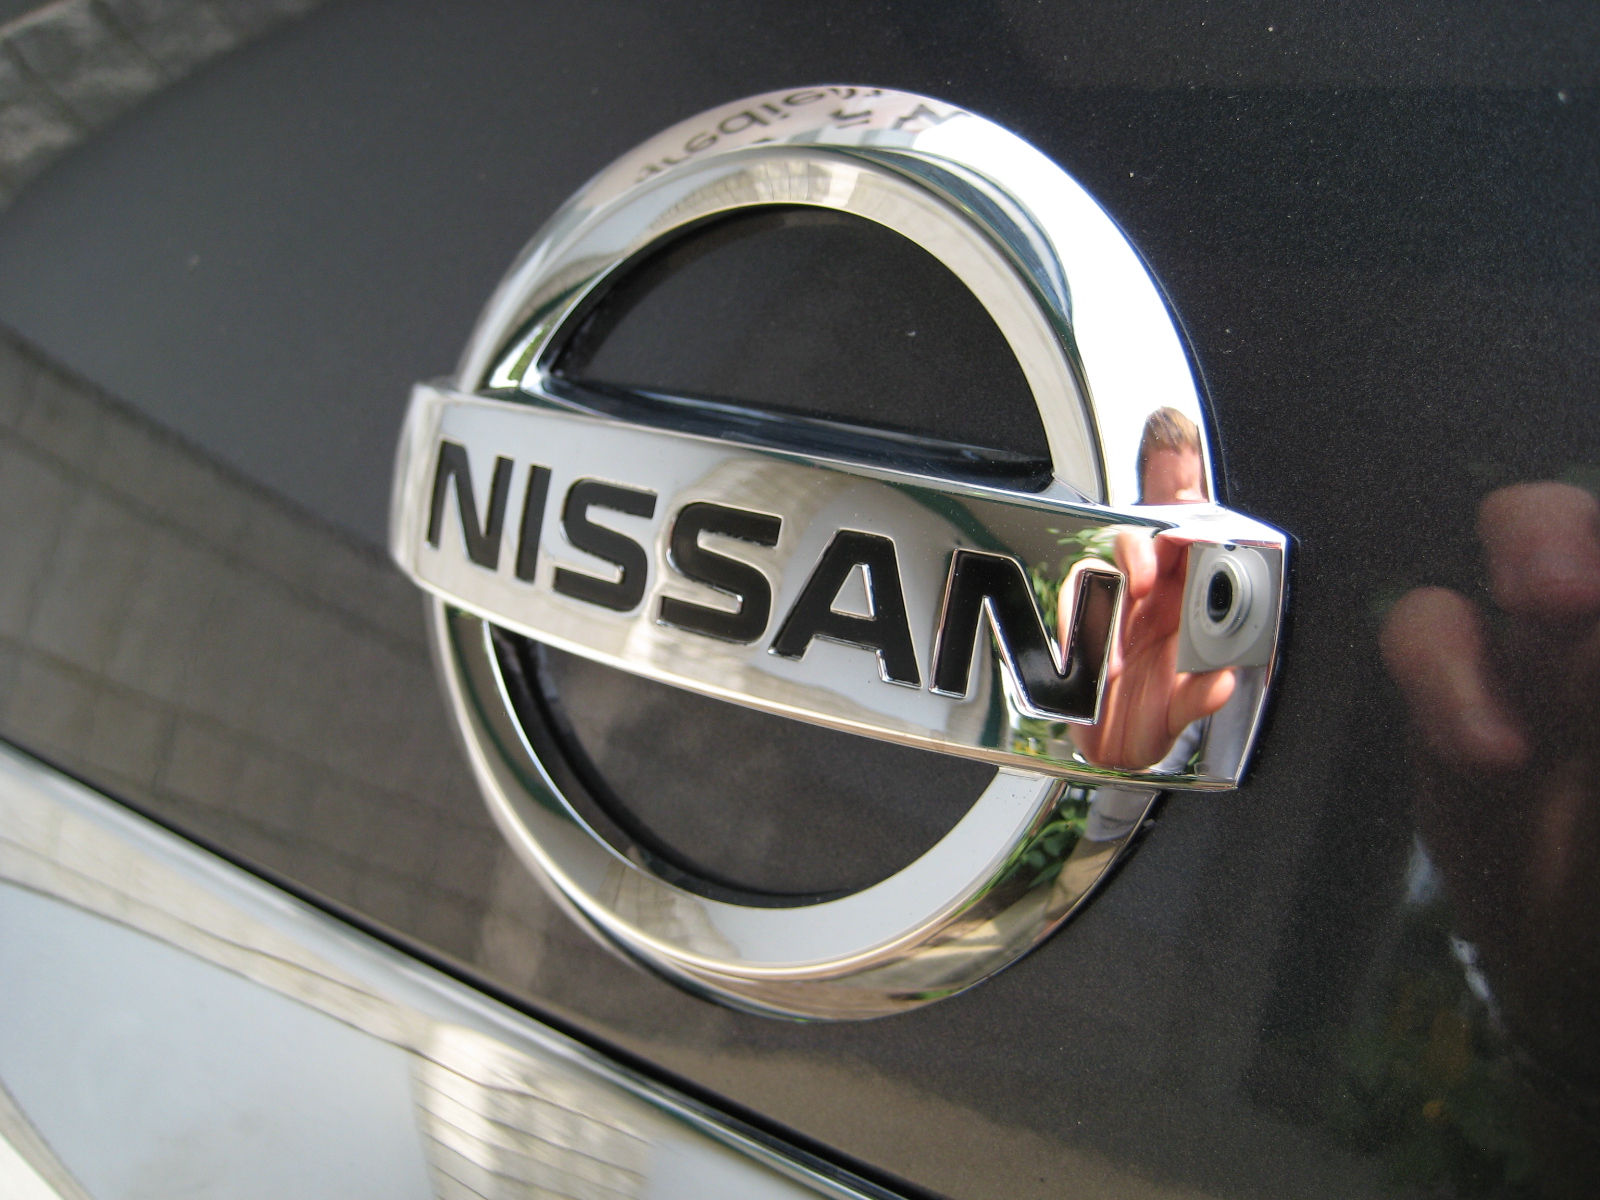 Nissan Logo, Nissan Car Symbol Meaning And History | Car Brand ...